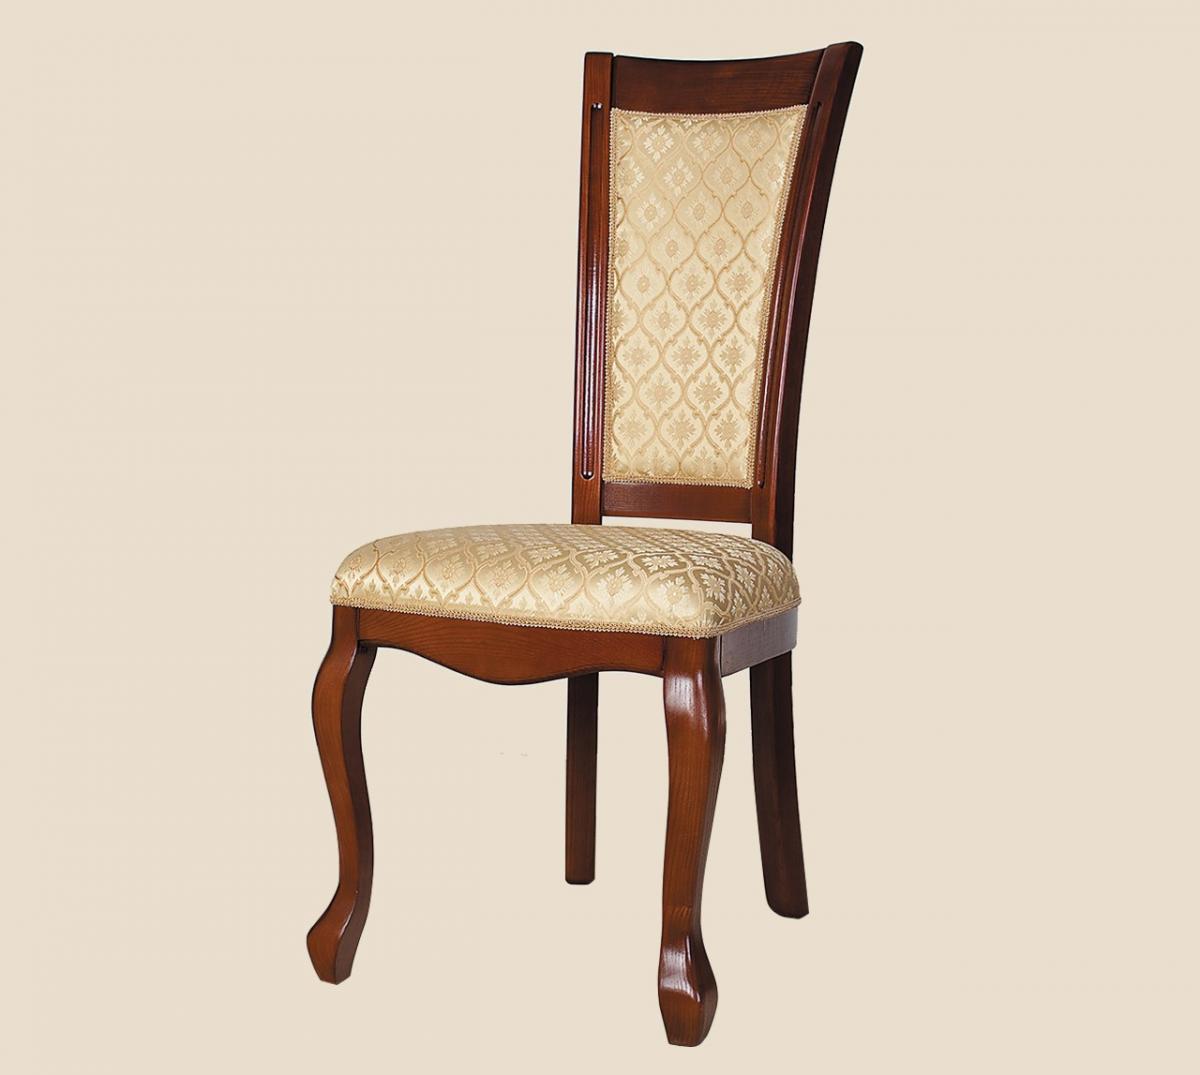 Chair "Classic" with goat's leg